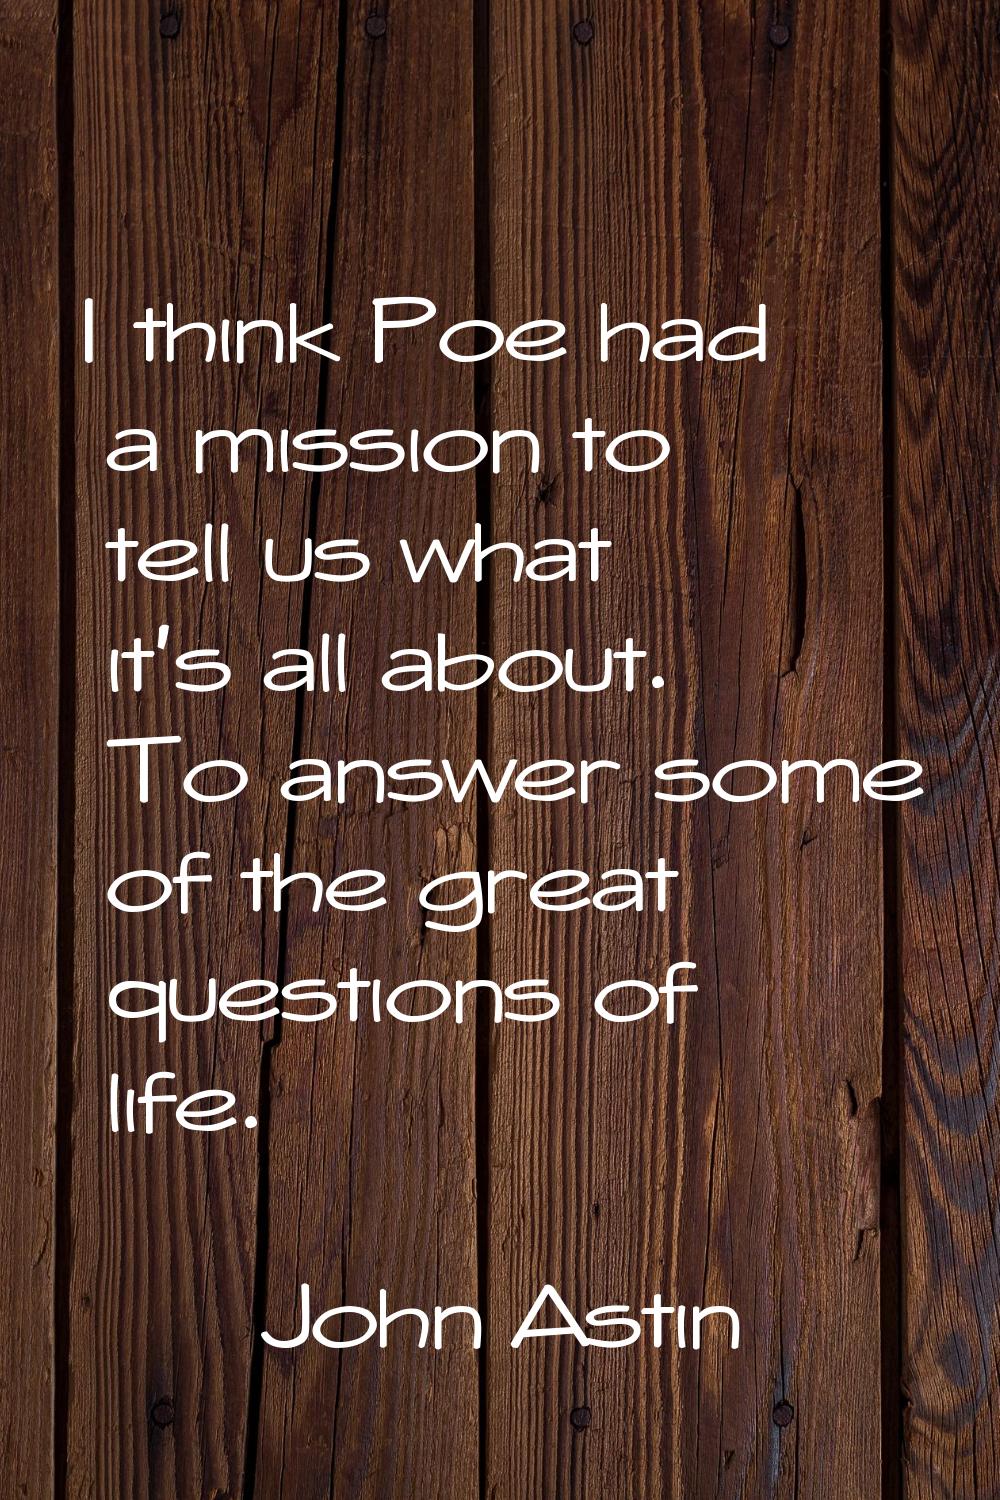 I think Poe had a mission to tell us what it's all about. To answer some of the great questions of 